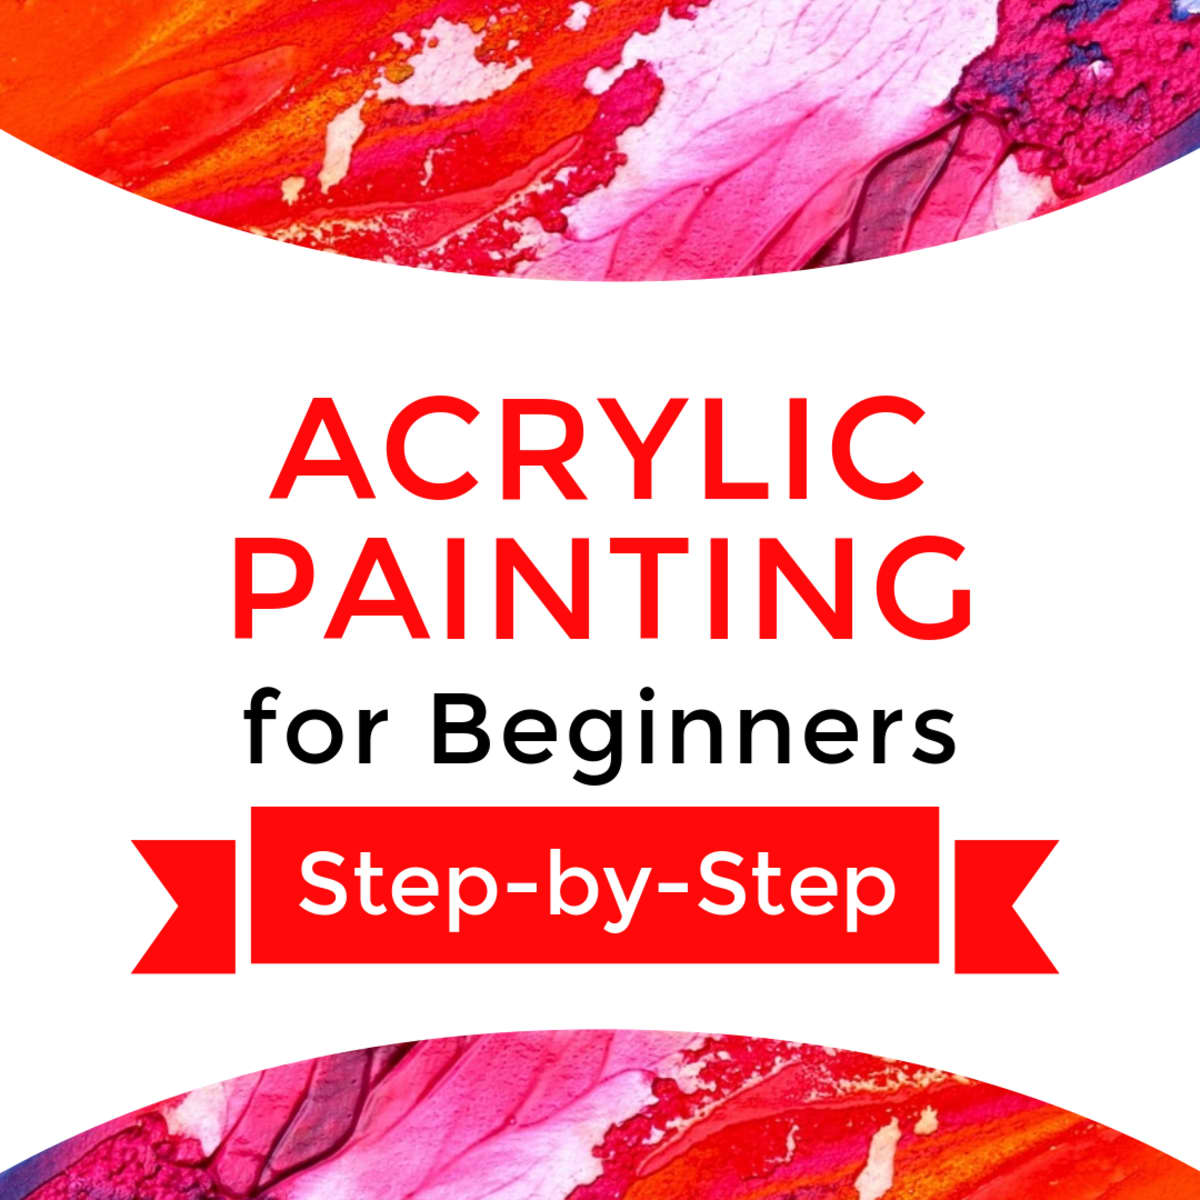 Step-by-Step Acrylic Painting for Beginners - FeltMagnet